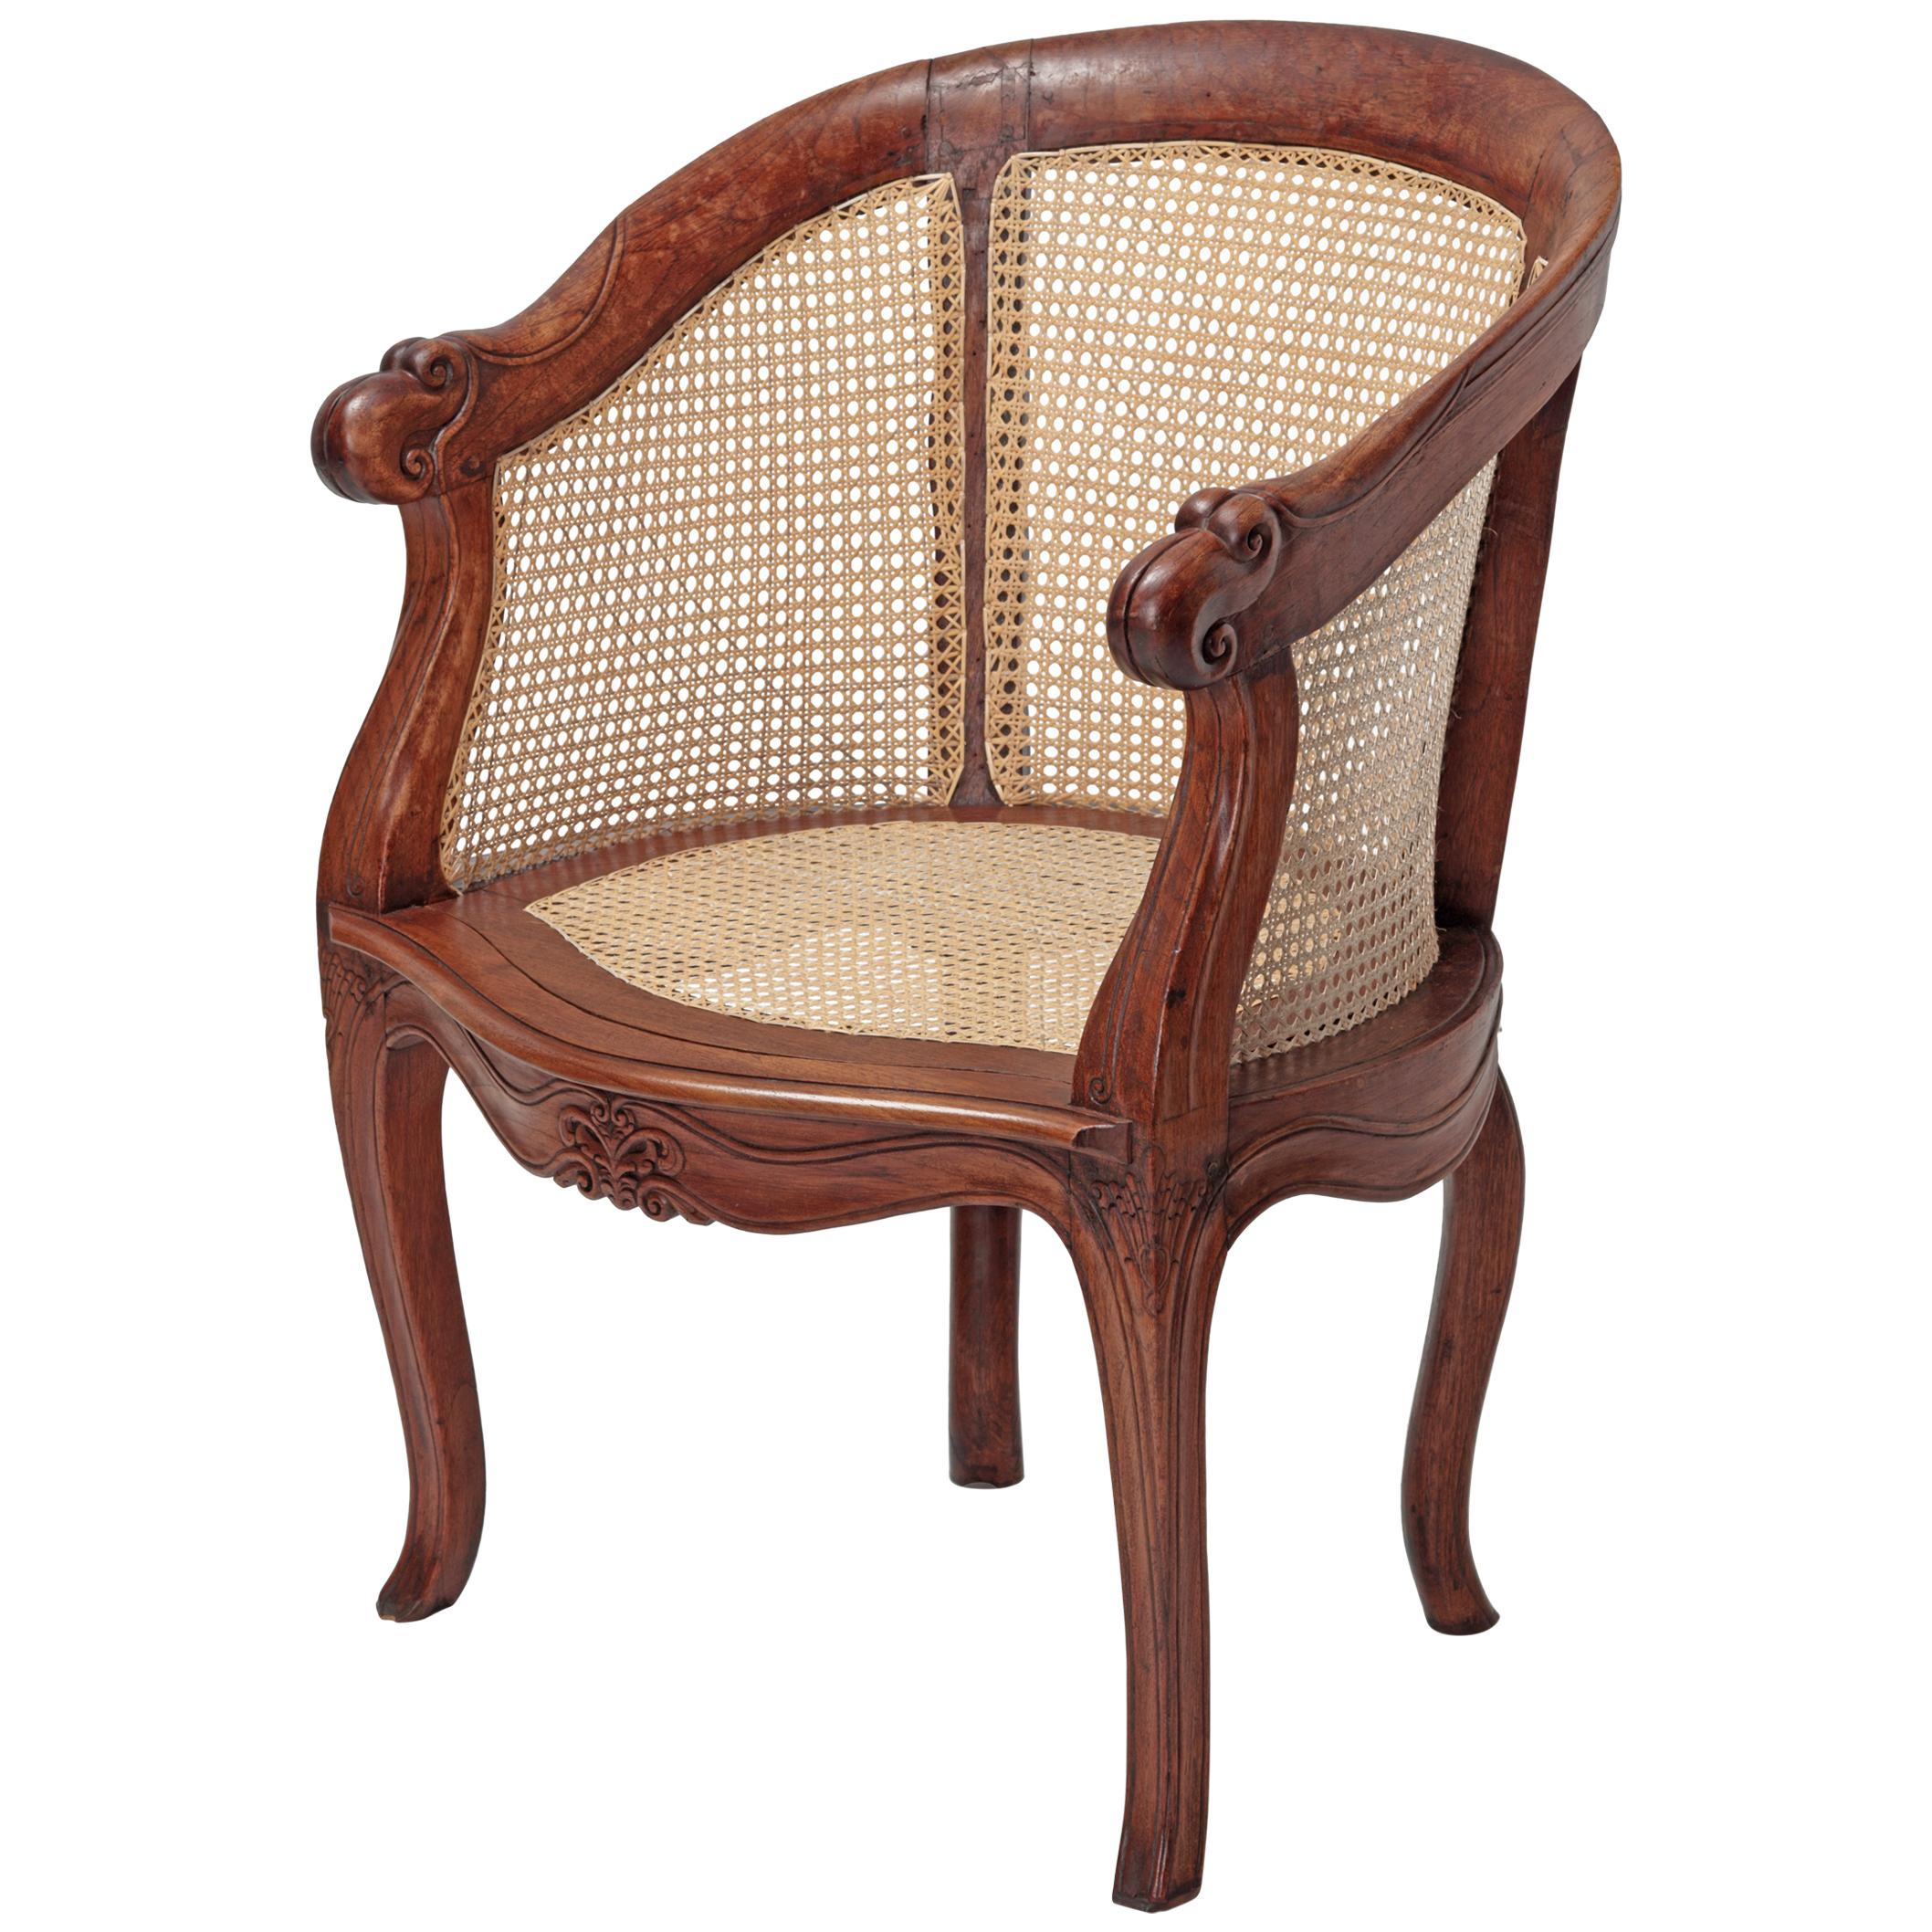 Dutch Colonial Teak Round Back Chair, Late 18th Century For Sale